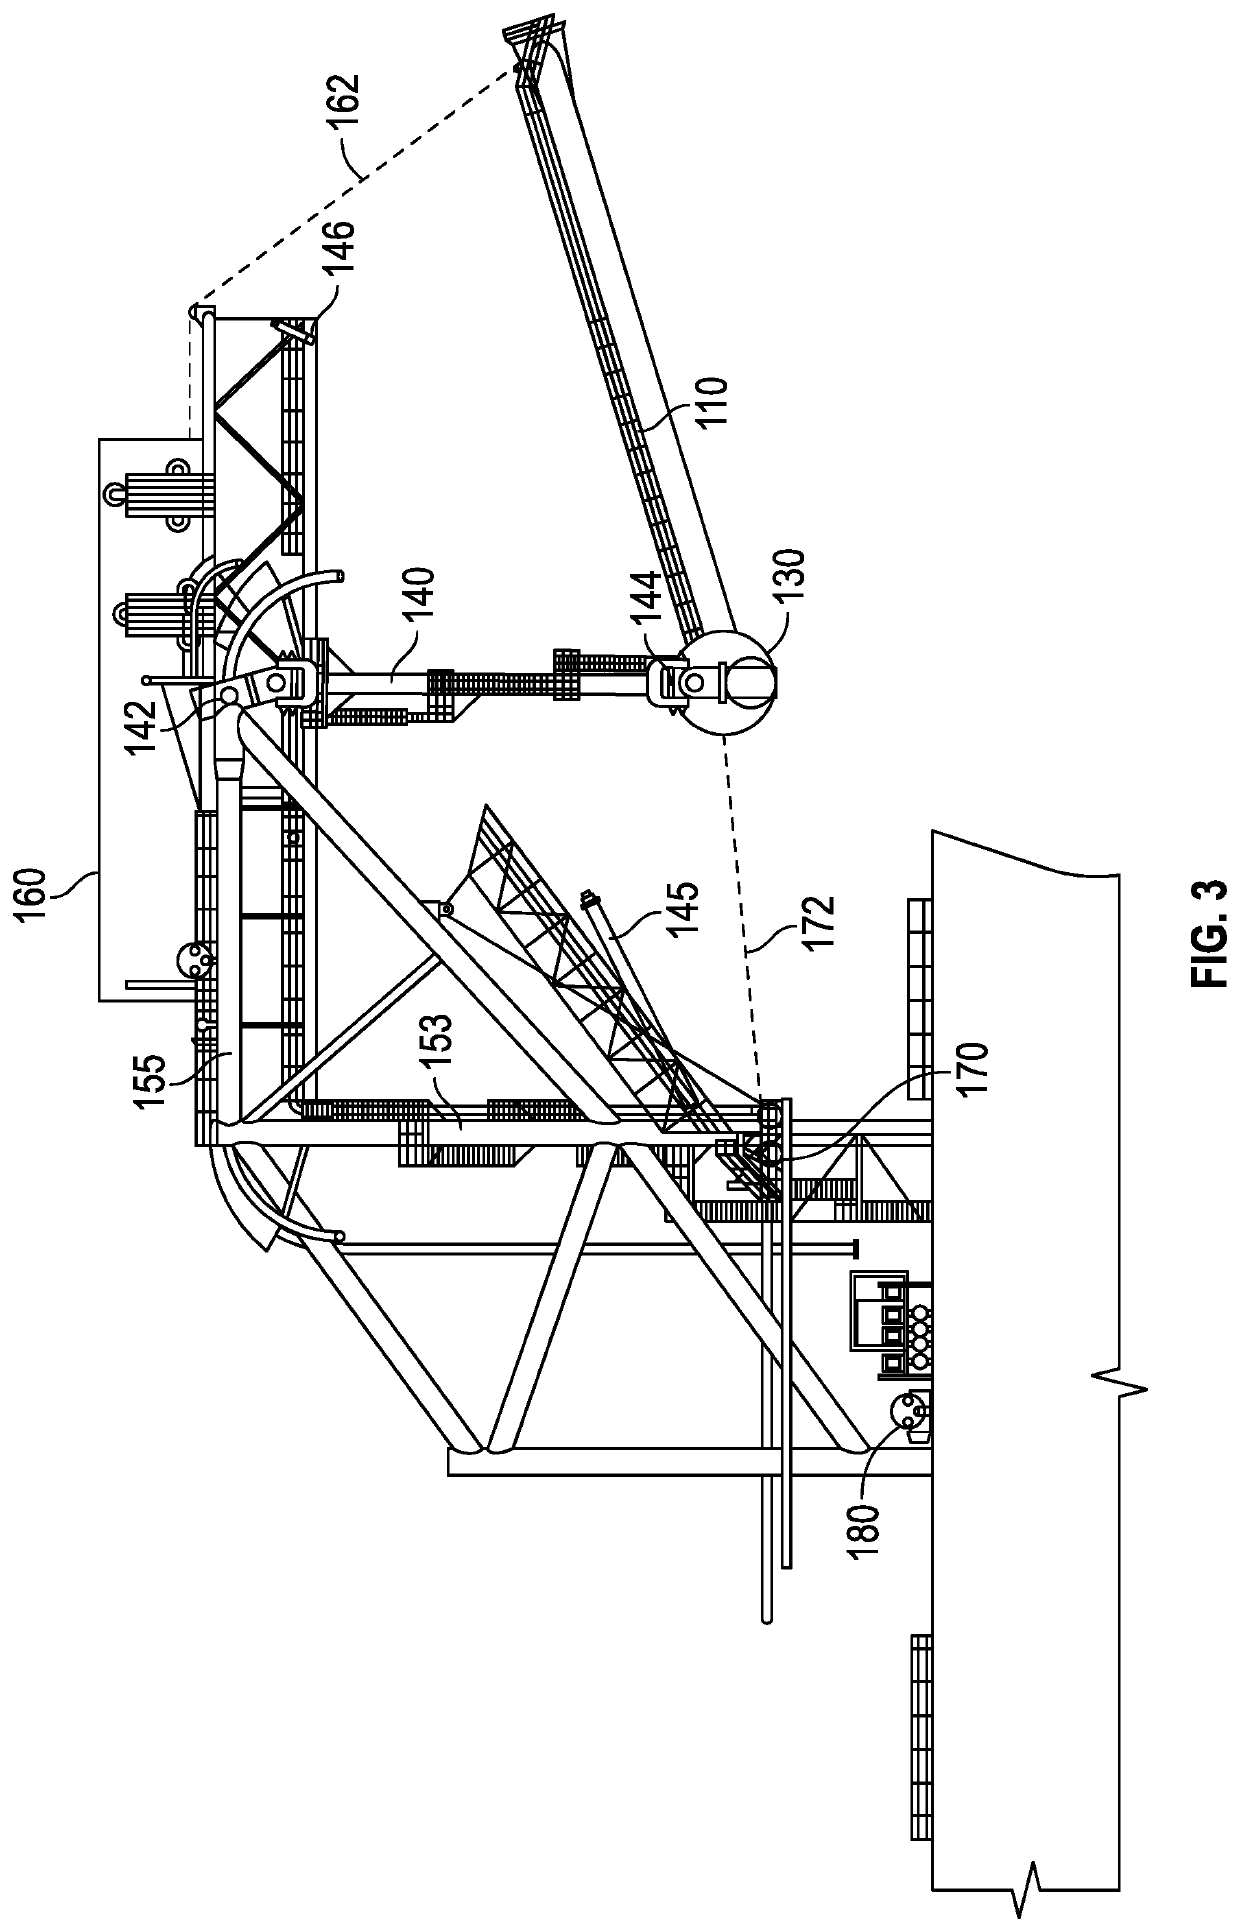 Disconnectable tower yoke mooring system and methods for using same